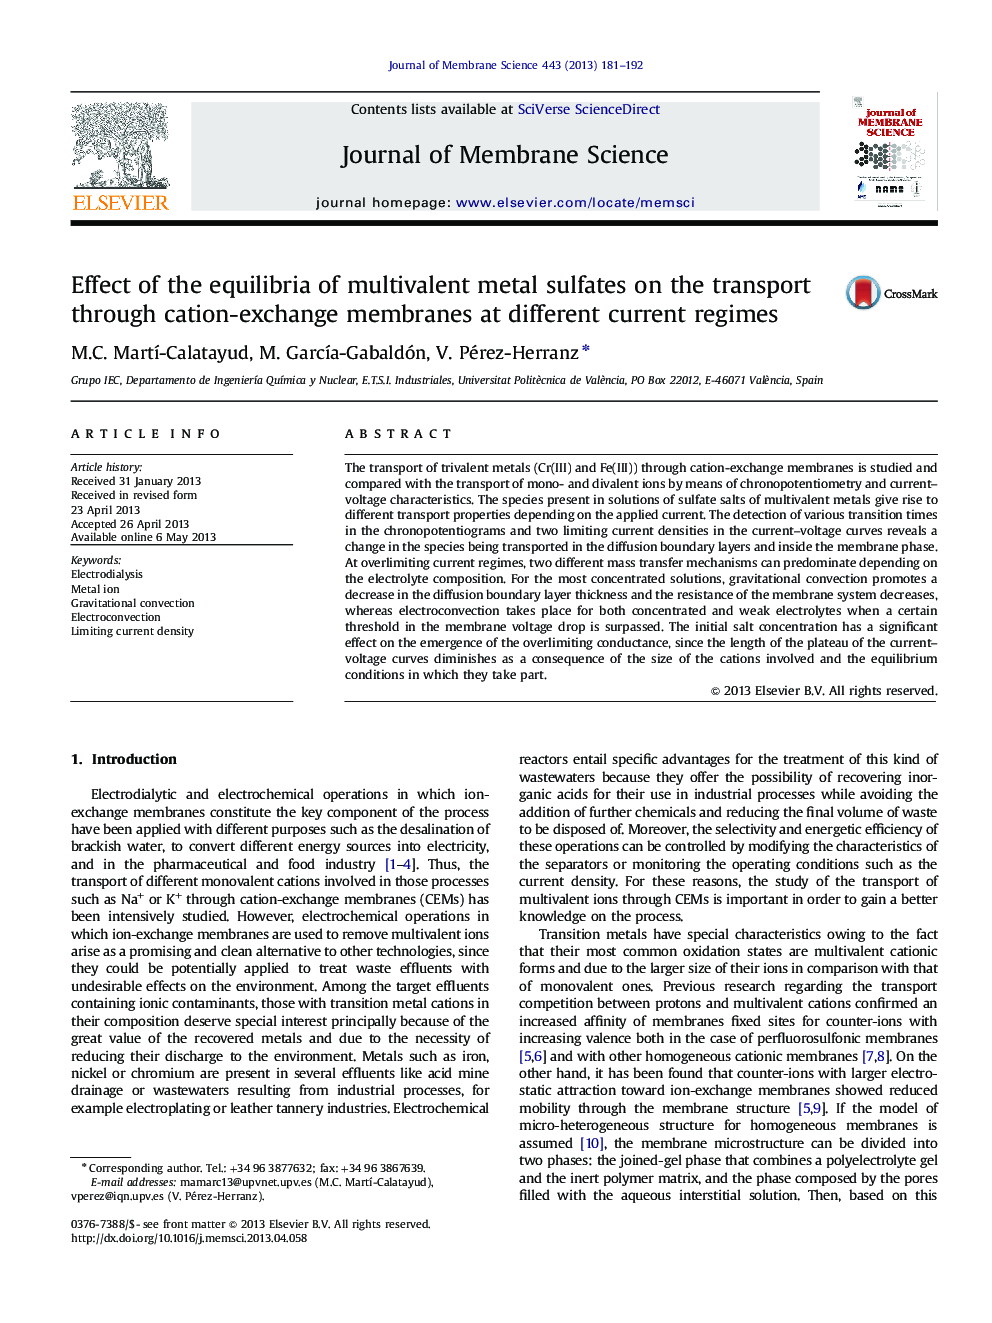 Effect of the equilibria of multivalent metal sulfates on the transport through cation-exchange membranes at different current regimes